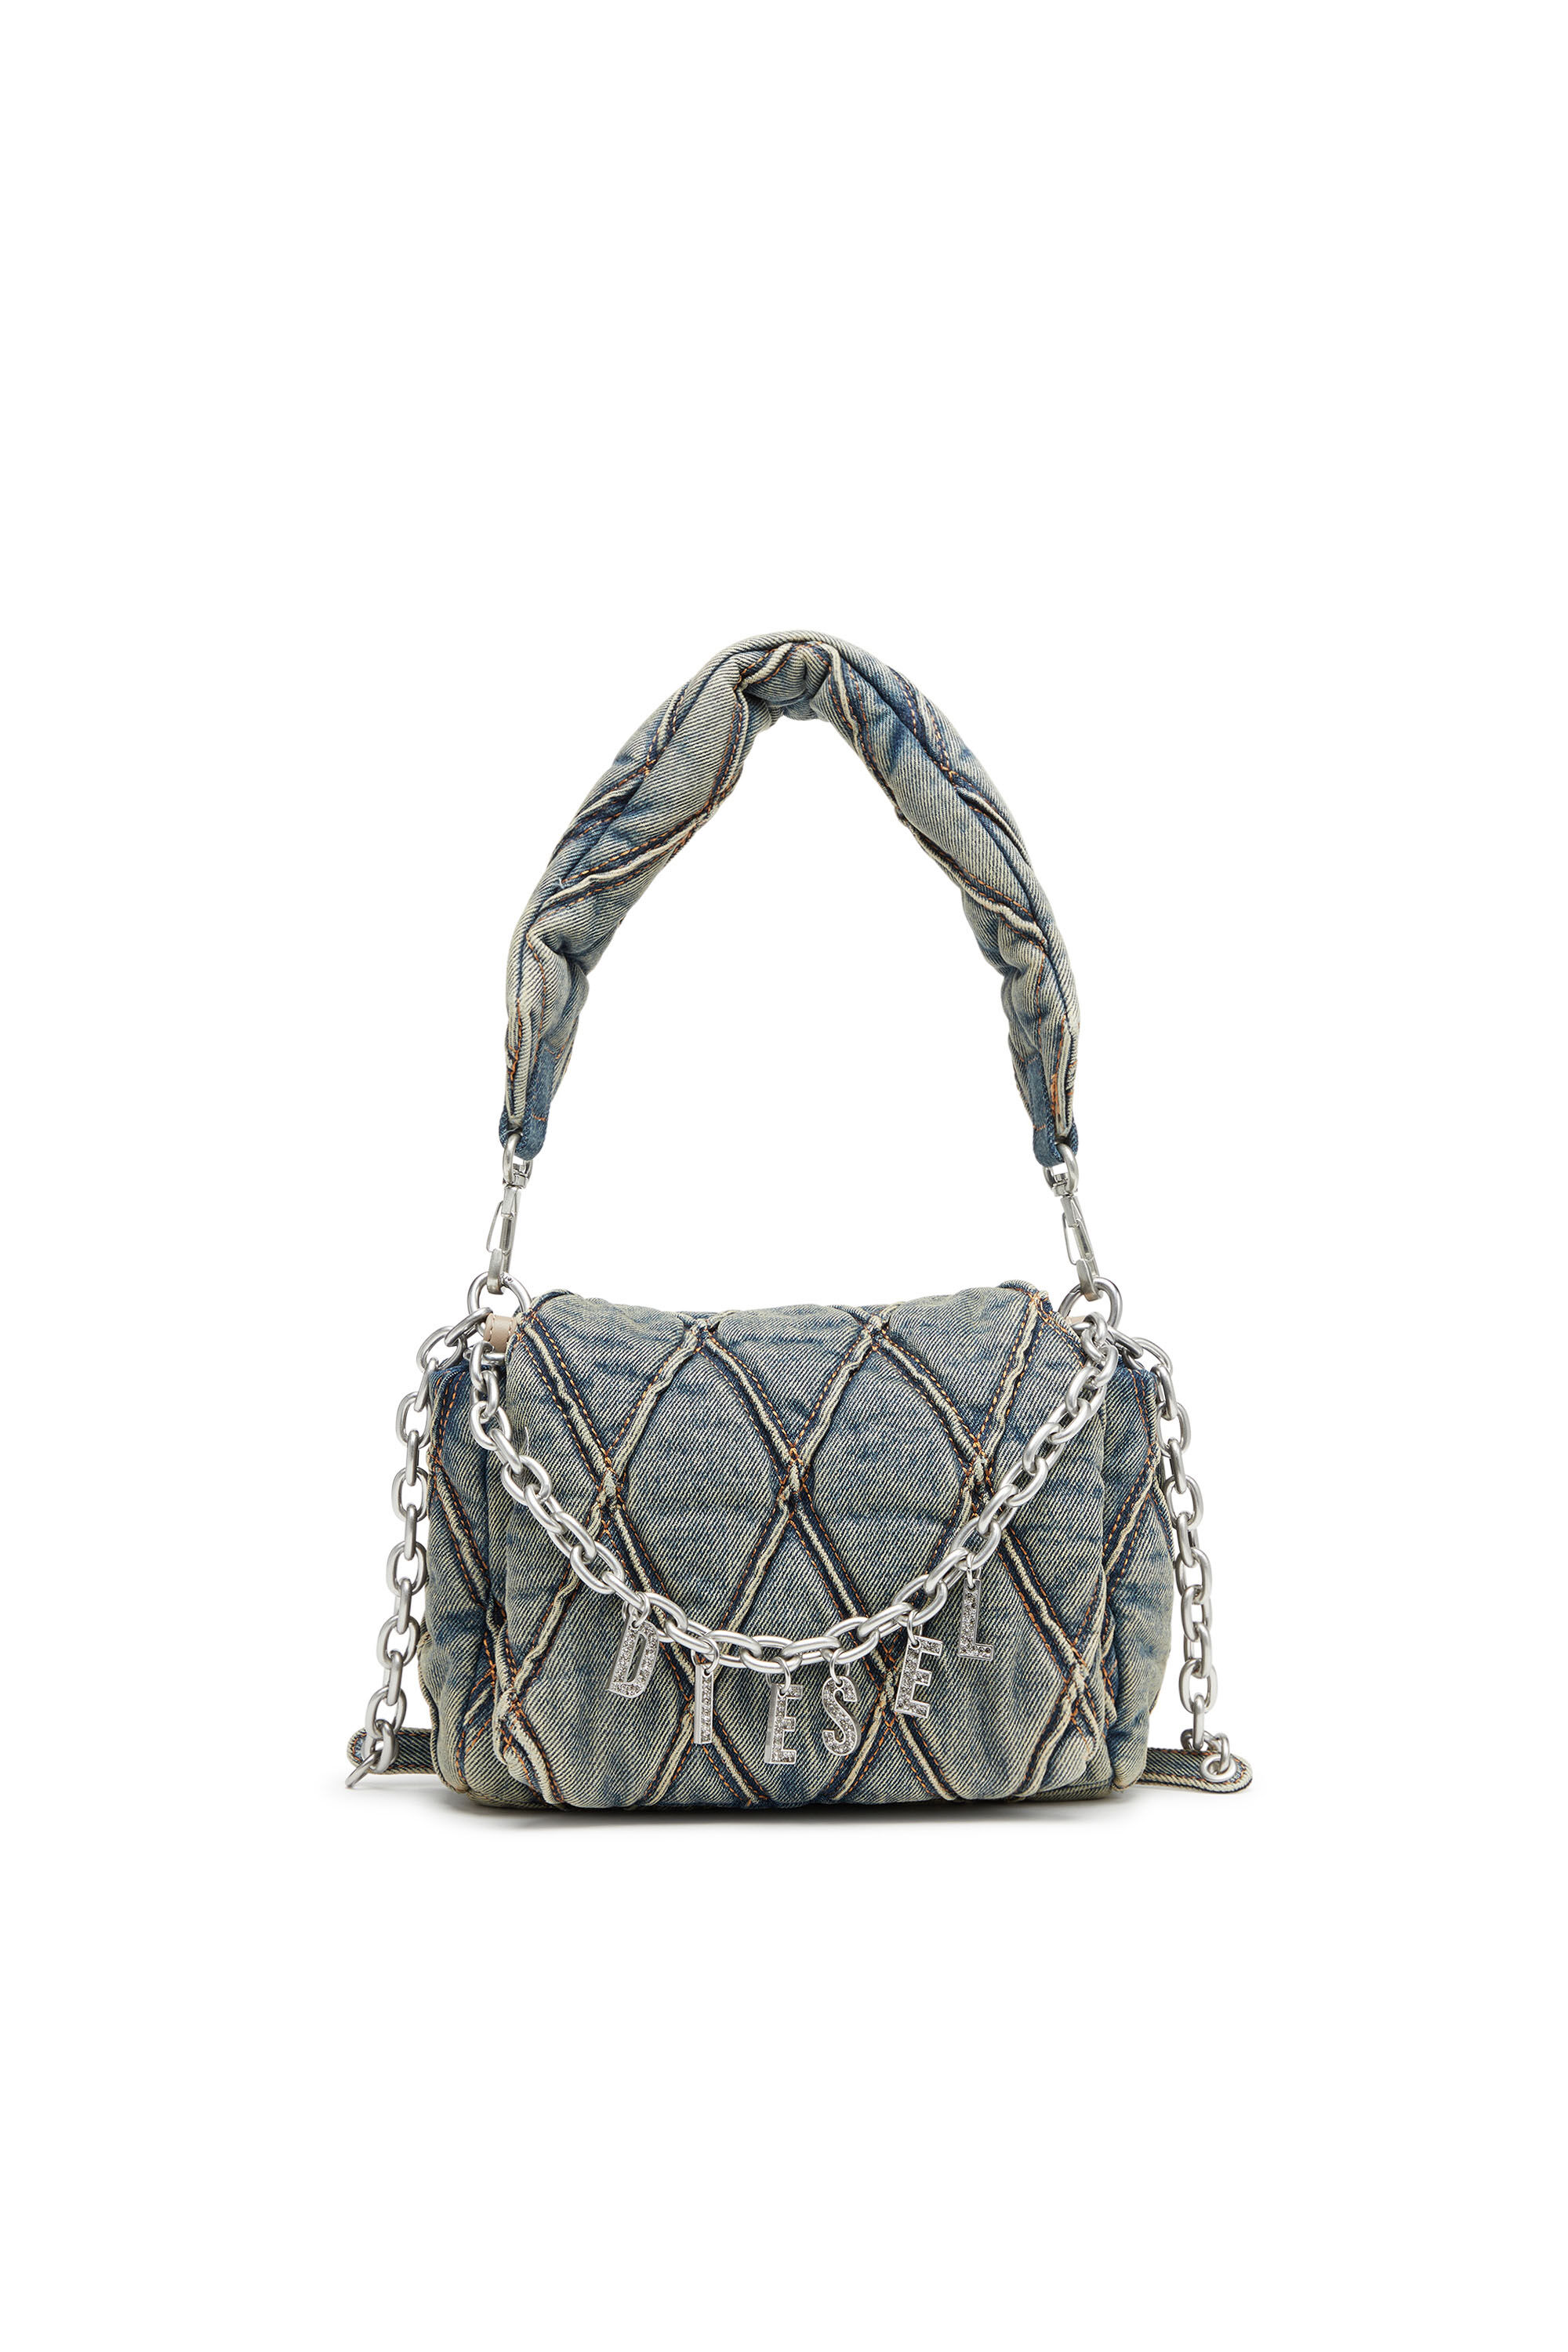 Women's Charm-D Shoulder S - Small handbag in quilted denim | CHARM-D ...